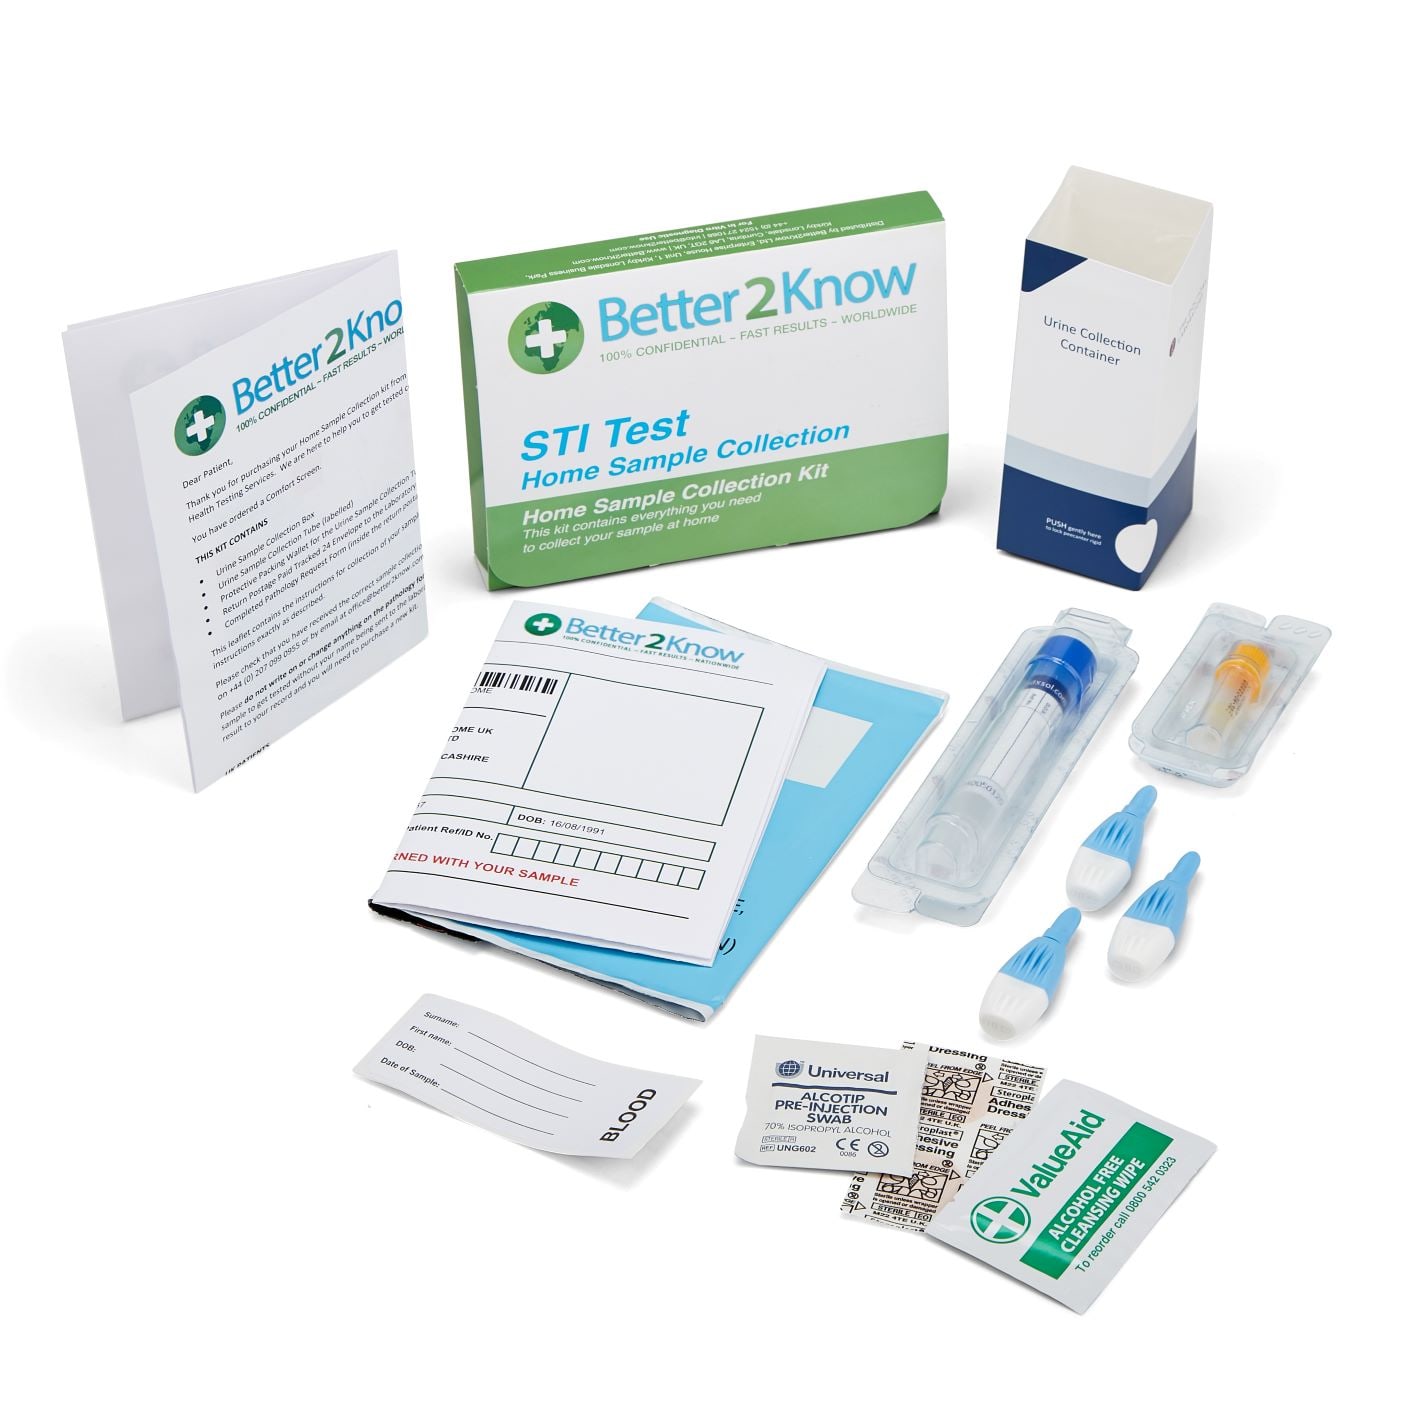 Better2Know&#039;s Peace of Mind Screen tests for Chlamydia, Gonorrhoea and Syphilis.